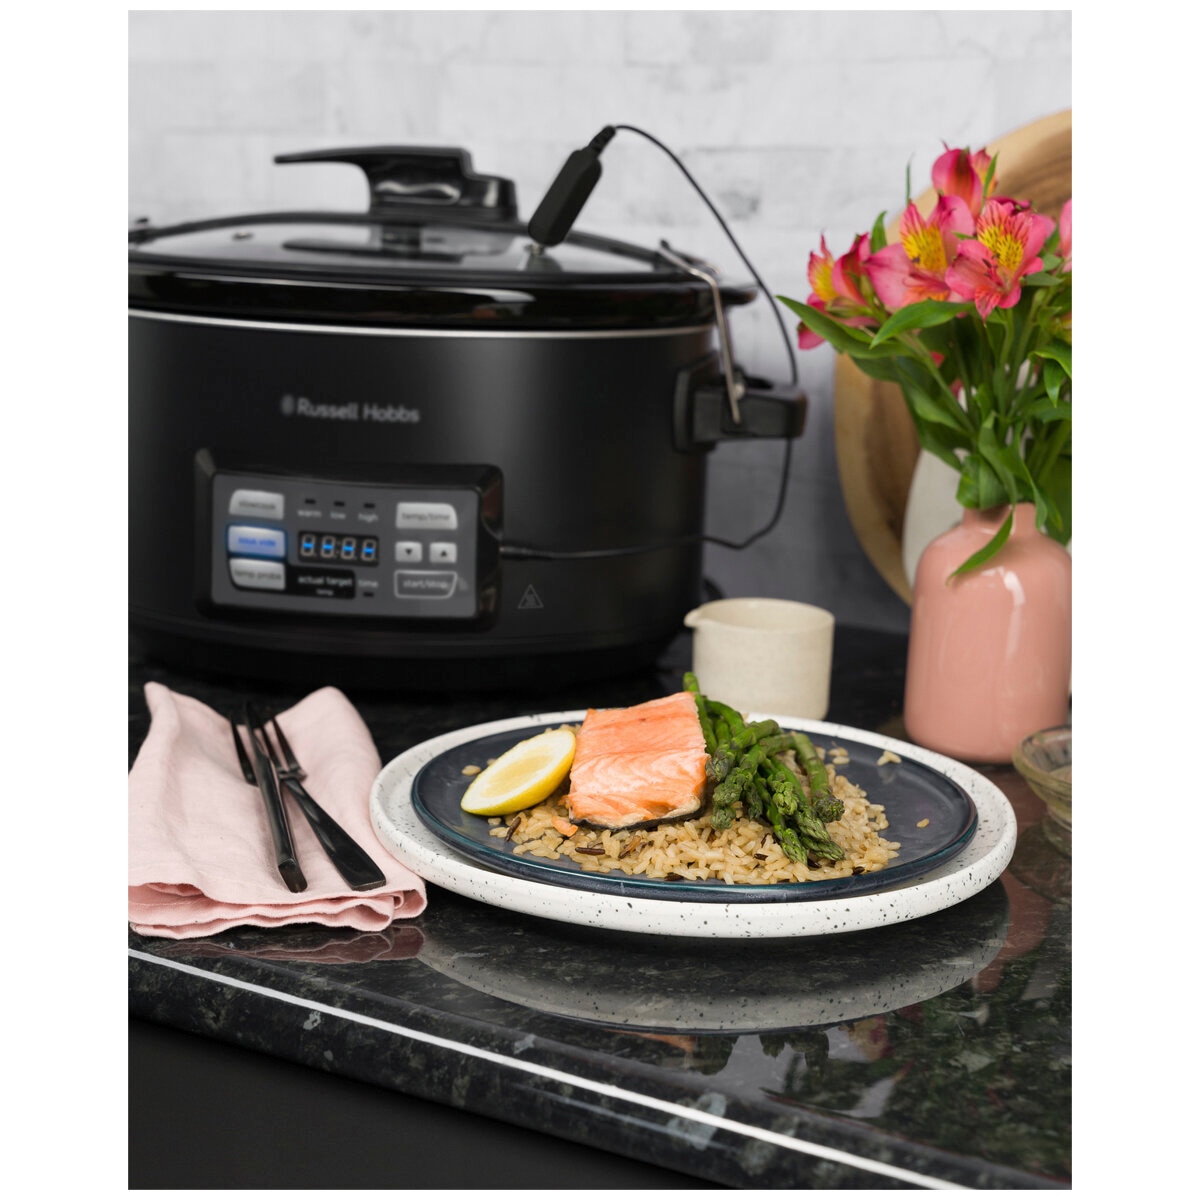 Russell Hobbs Master Slow Cooker and Sous Vide